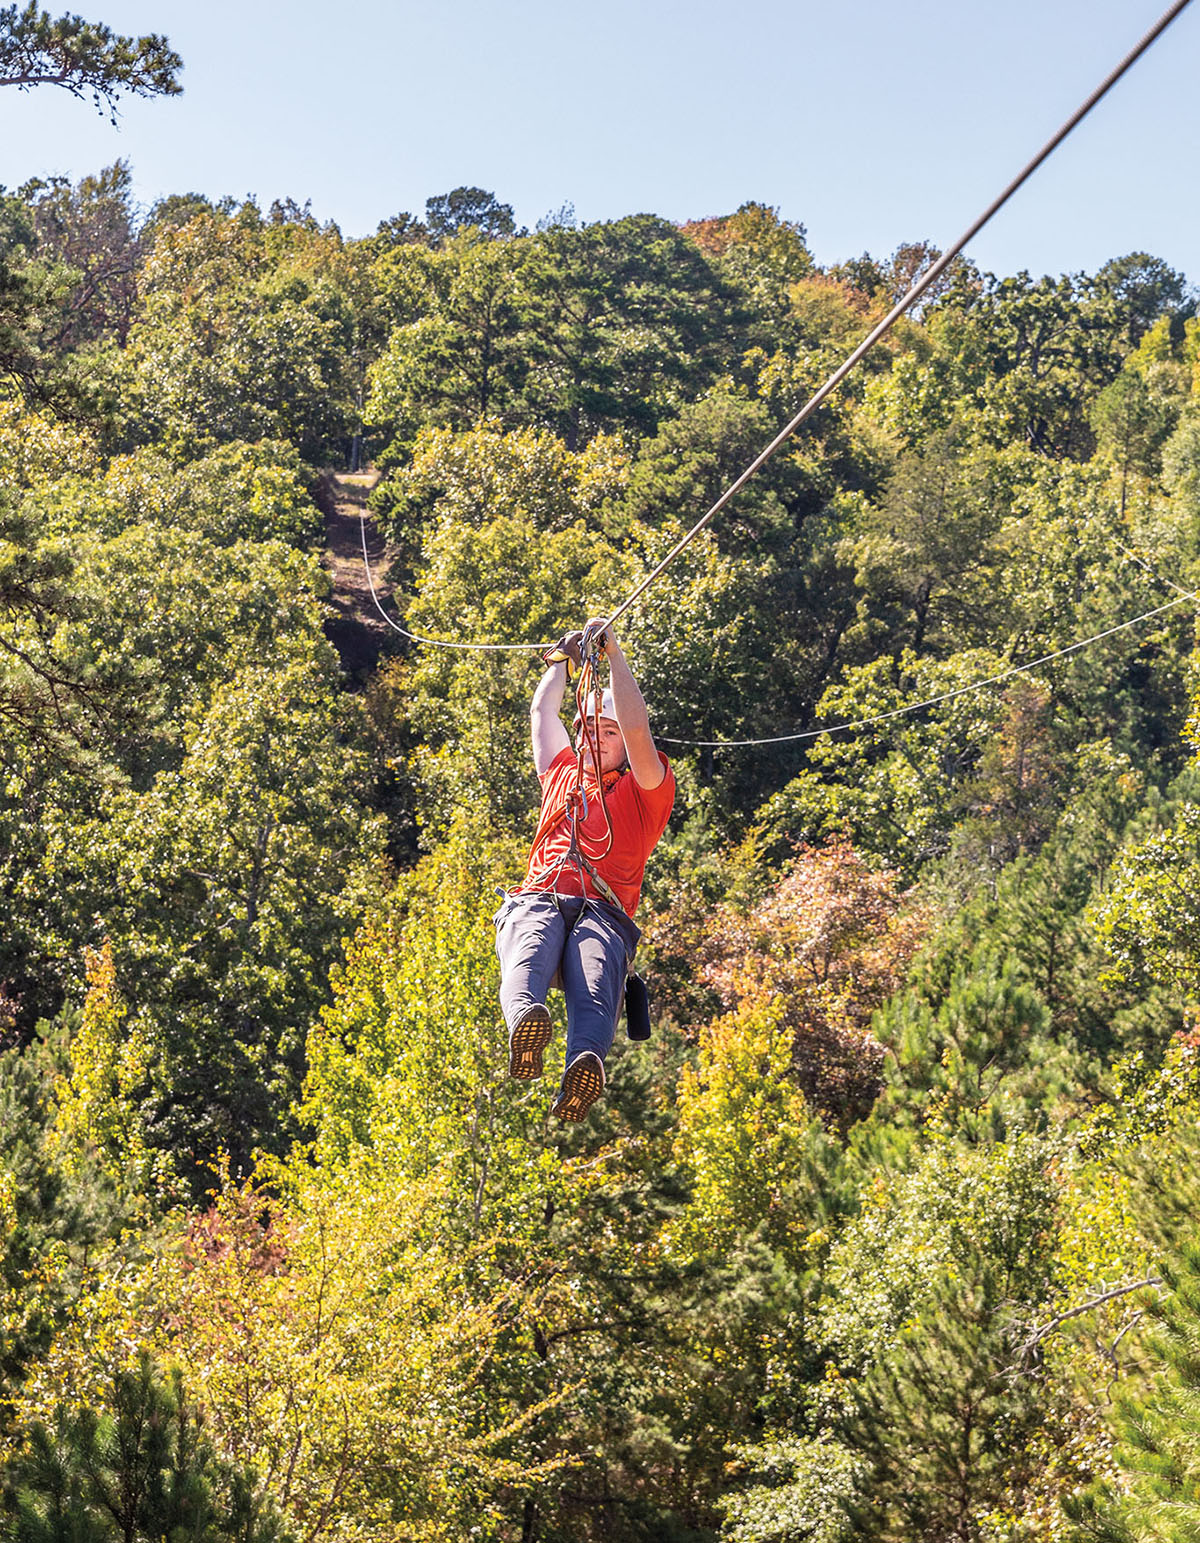 A person in a brightly colored shirt zip lines through green trees